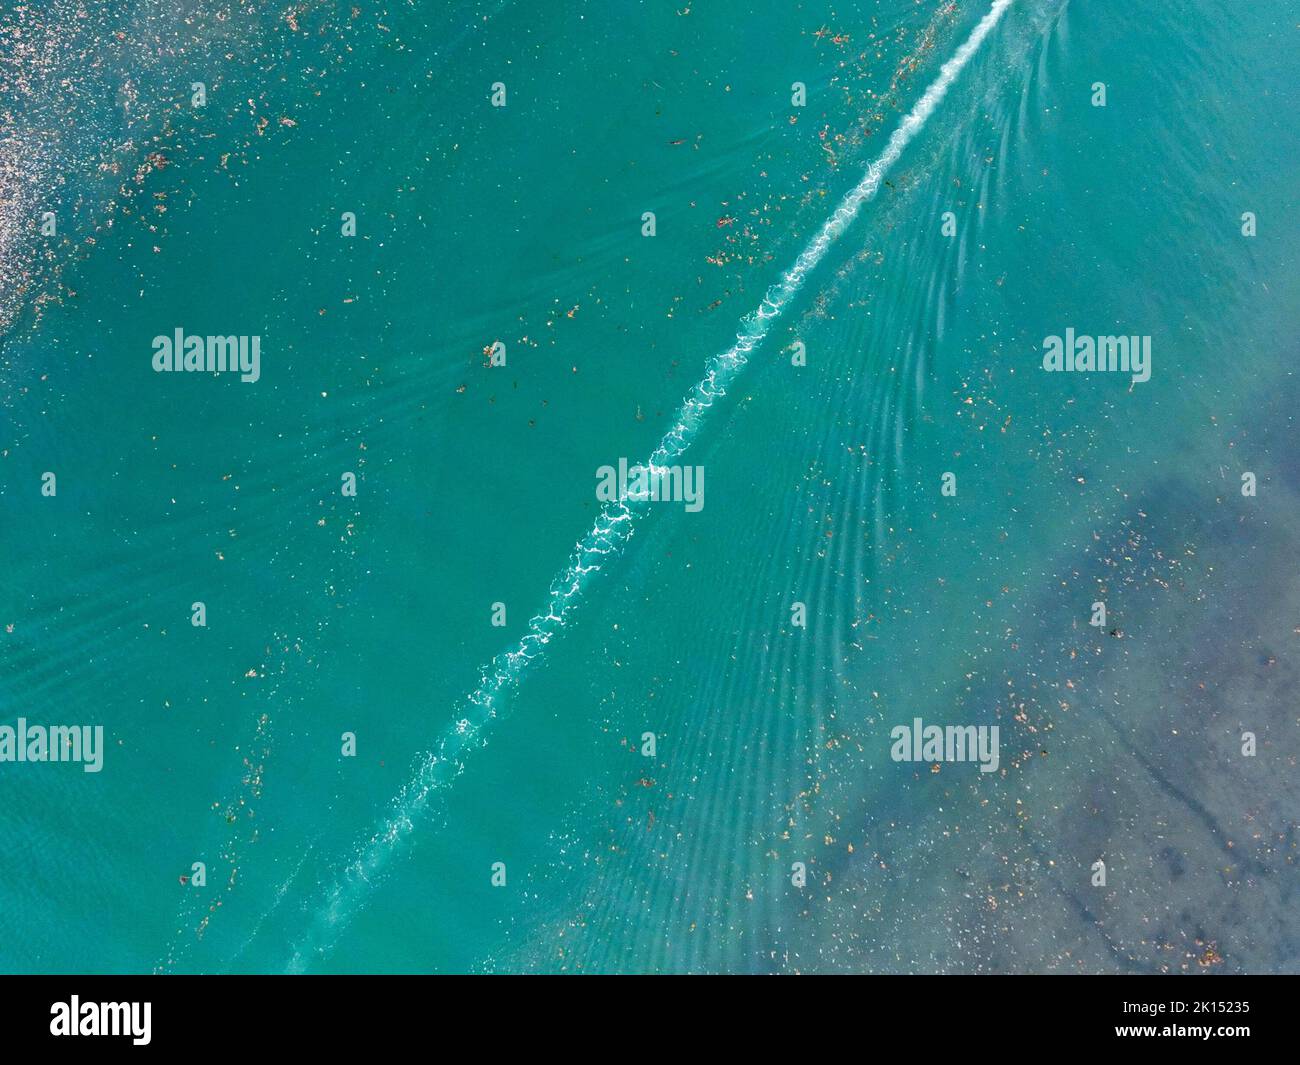 Aerial view of the pattern made on water by the wake of a speedboct as it passed through floating debris in an estuary. No people. Stock Photo